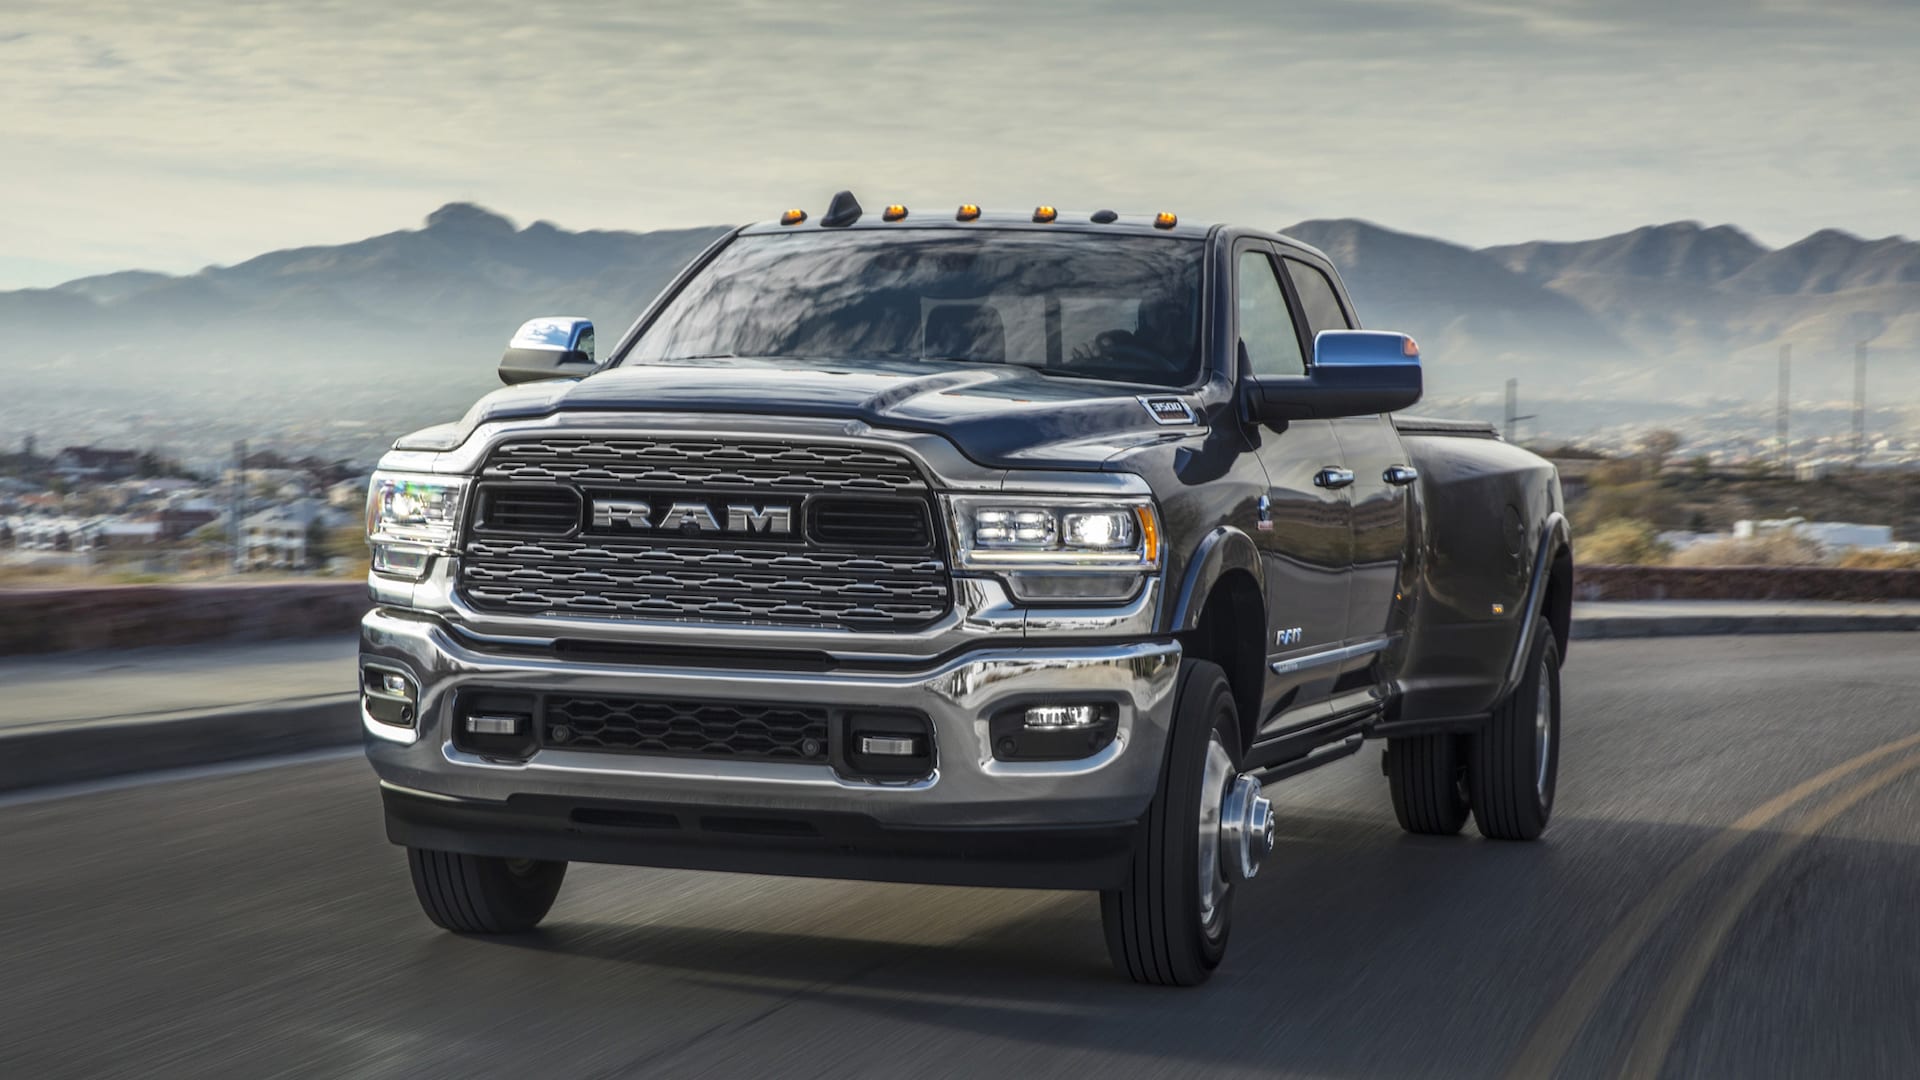 2022 Ram 3500 Prices, Reviews, and Photos - MotorTrend